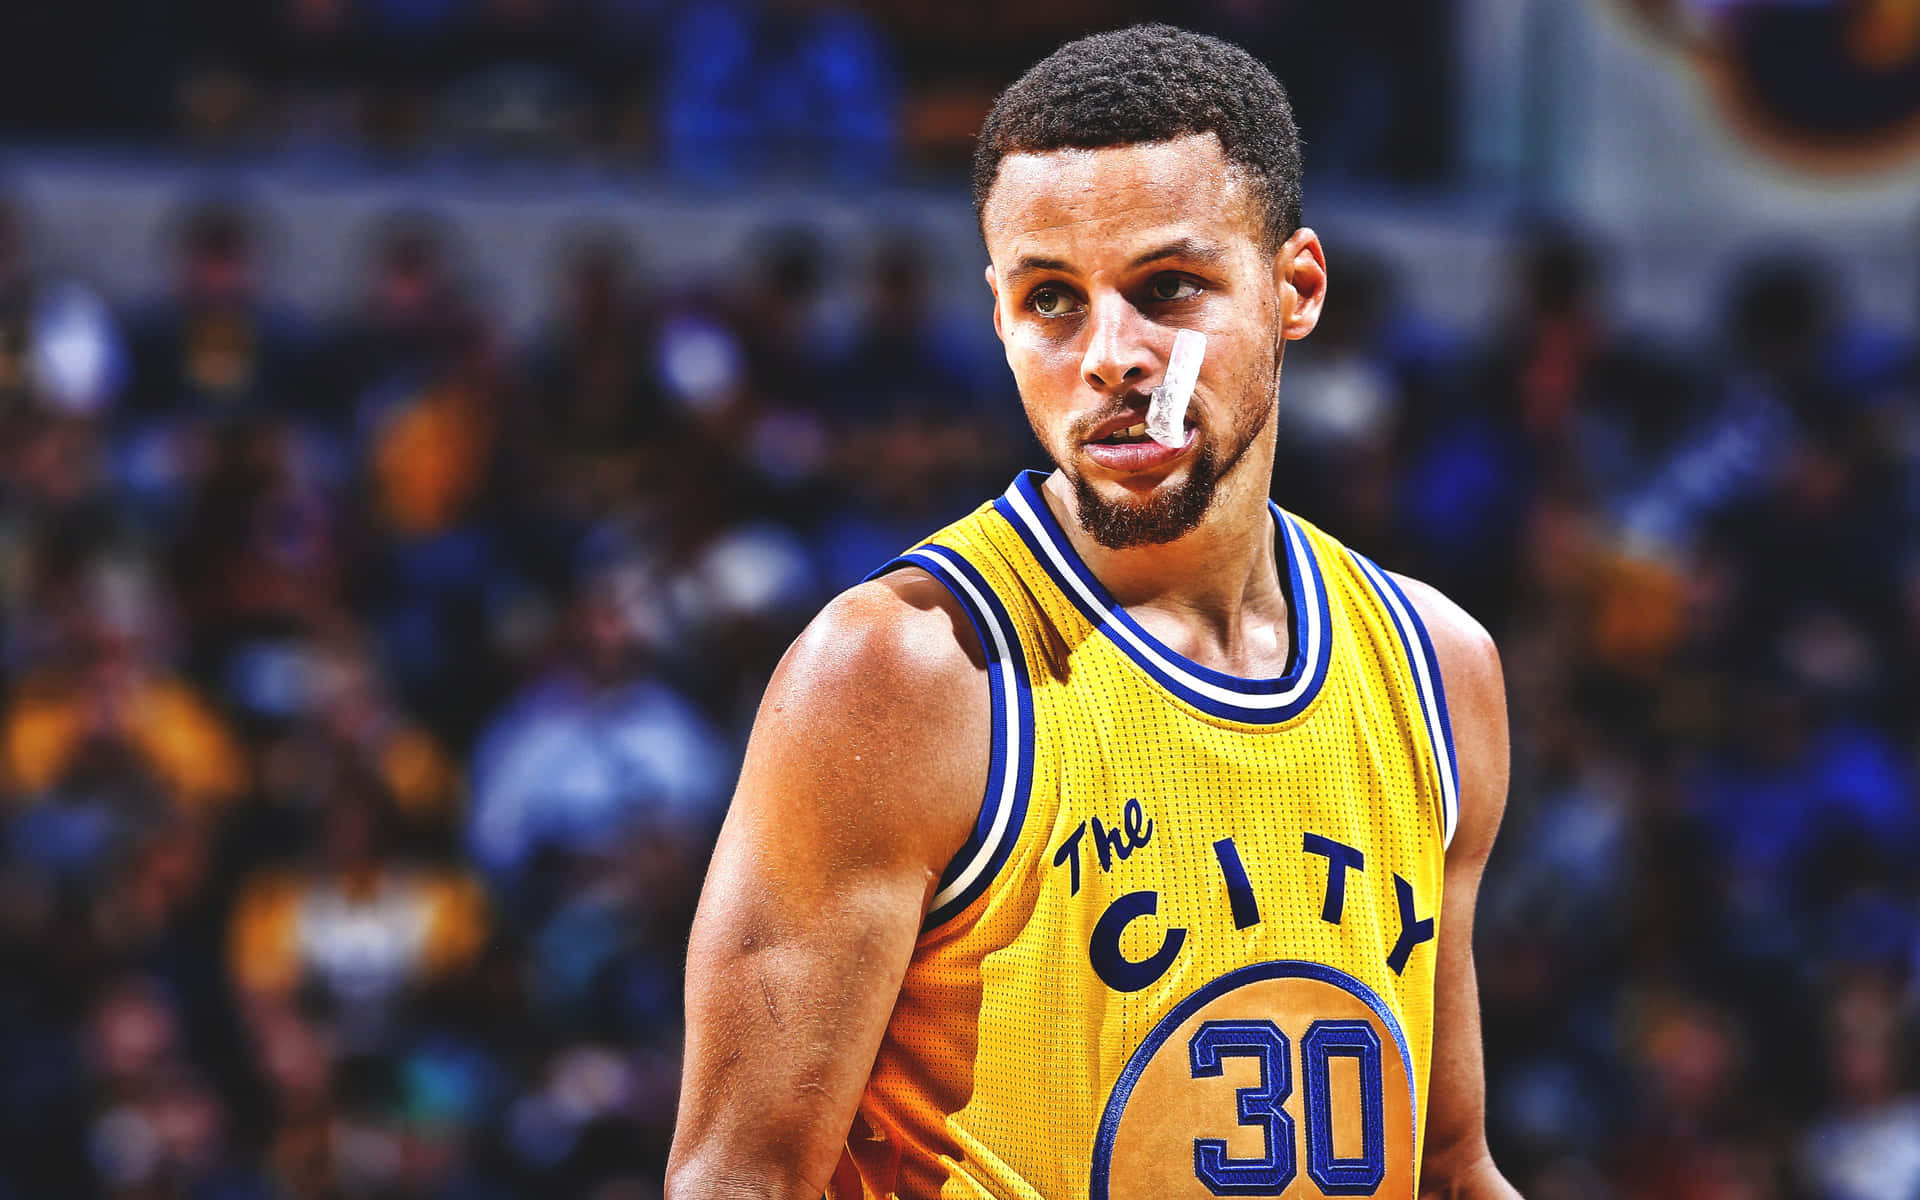 HD stephen curry wallpapers  Peakpx